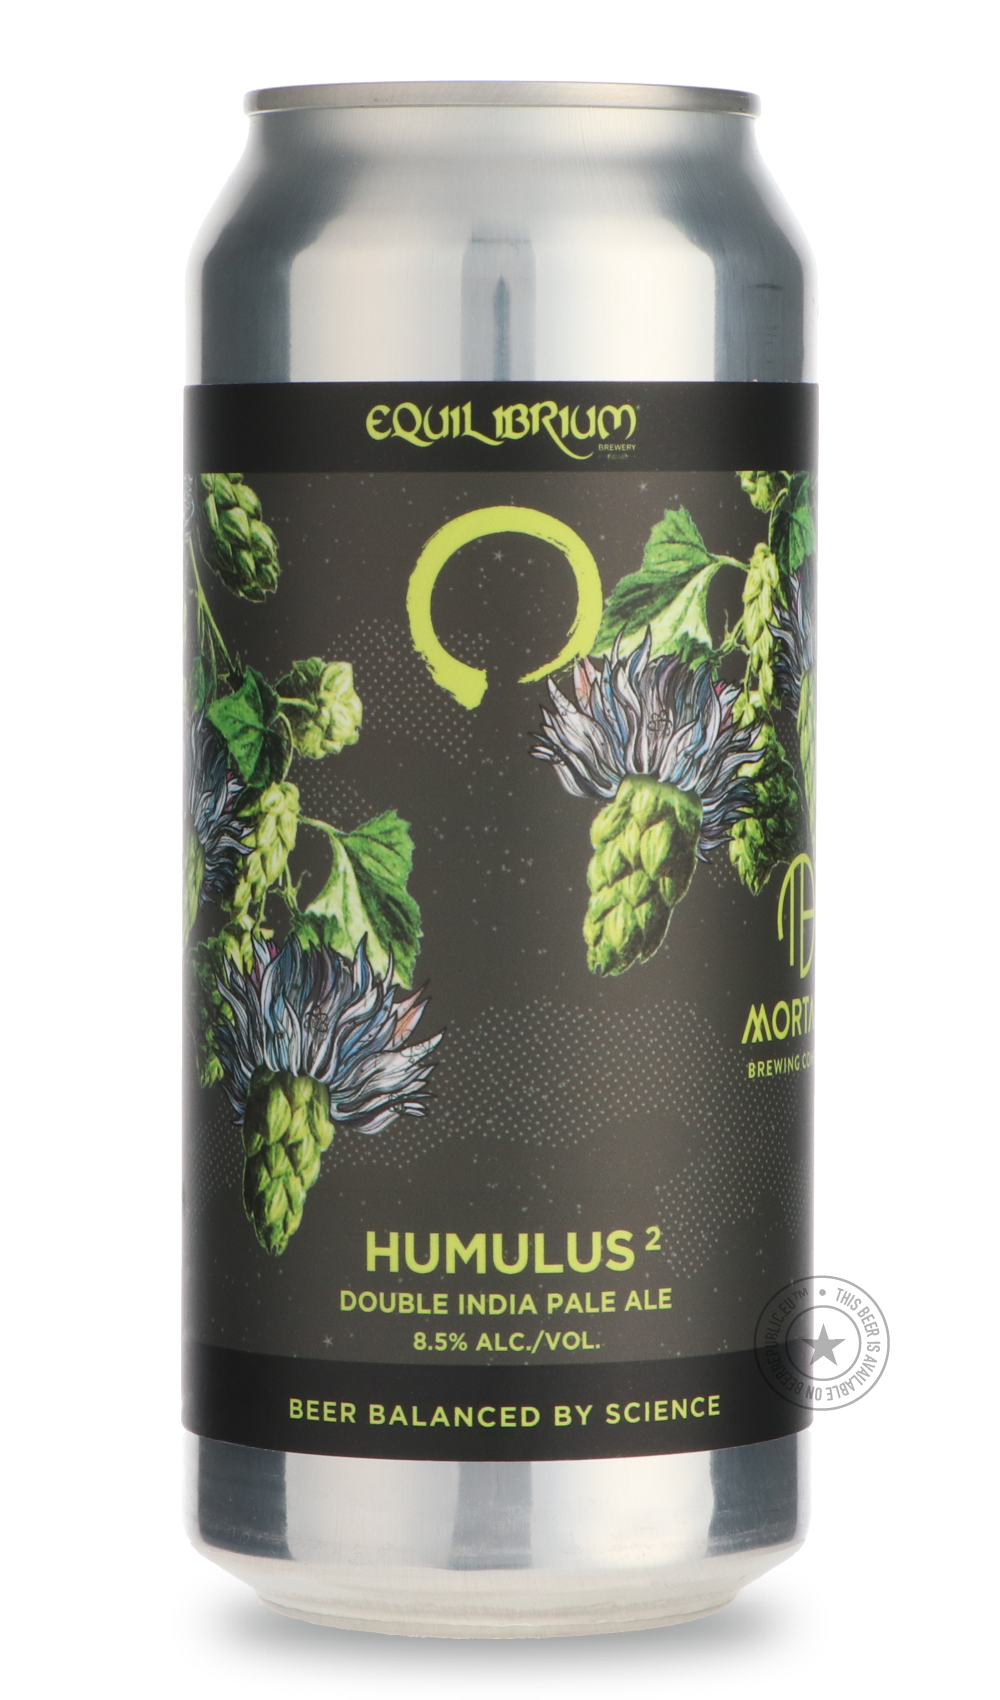 -Equilibrium- Humulus² / Mortalis-IPA- Only @ Beer Republic - The best online beer store for American & Canadian craft beer - Buy beer online from the USA and Canada - Bier online kopen - Amerikaans bier kopen - Craft beer store - Craft beer kopen - Amerikanisch bier kaufen - Bier online kaufen - Acheter biere online - IPA - Stout - Porter - New England IPA - Hazy IPA - Imperial Stout - Barrel Aged - Barrel Aged Imperial Stout - Brown - Dark beer - Blond - Blonde - Pilsner - Lager - Wheat - Weizen - Amber -